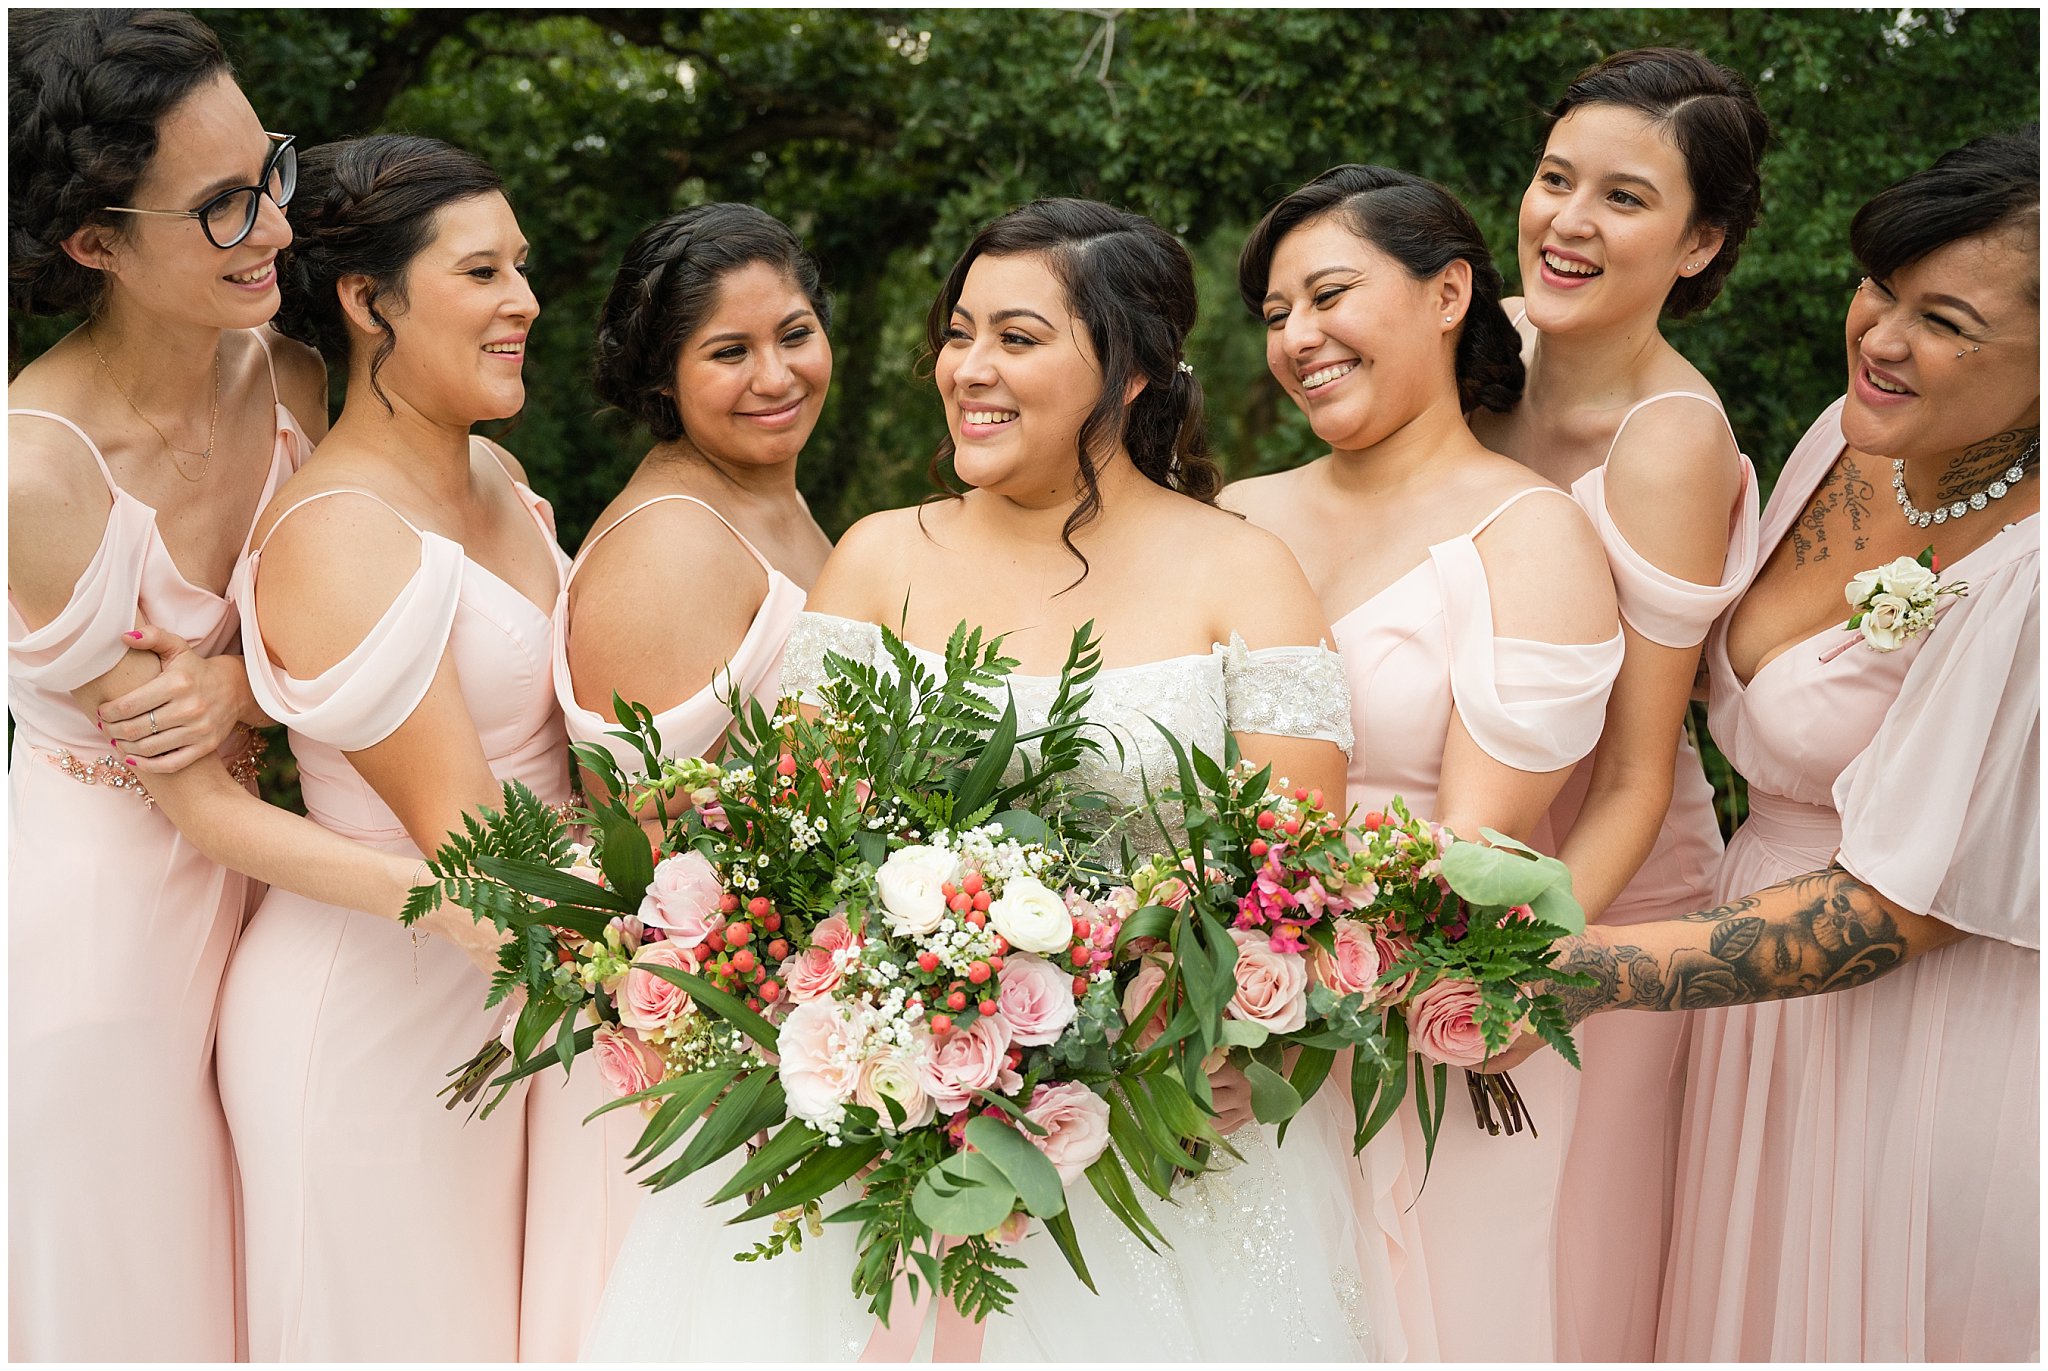 Bride and groom with wedding party in blush dresses and gray suits | Rustic Mountain Destination Wedding at Oak Hills Utah | Jessie and Dallin Photography